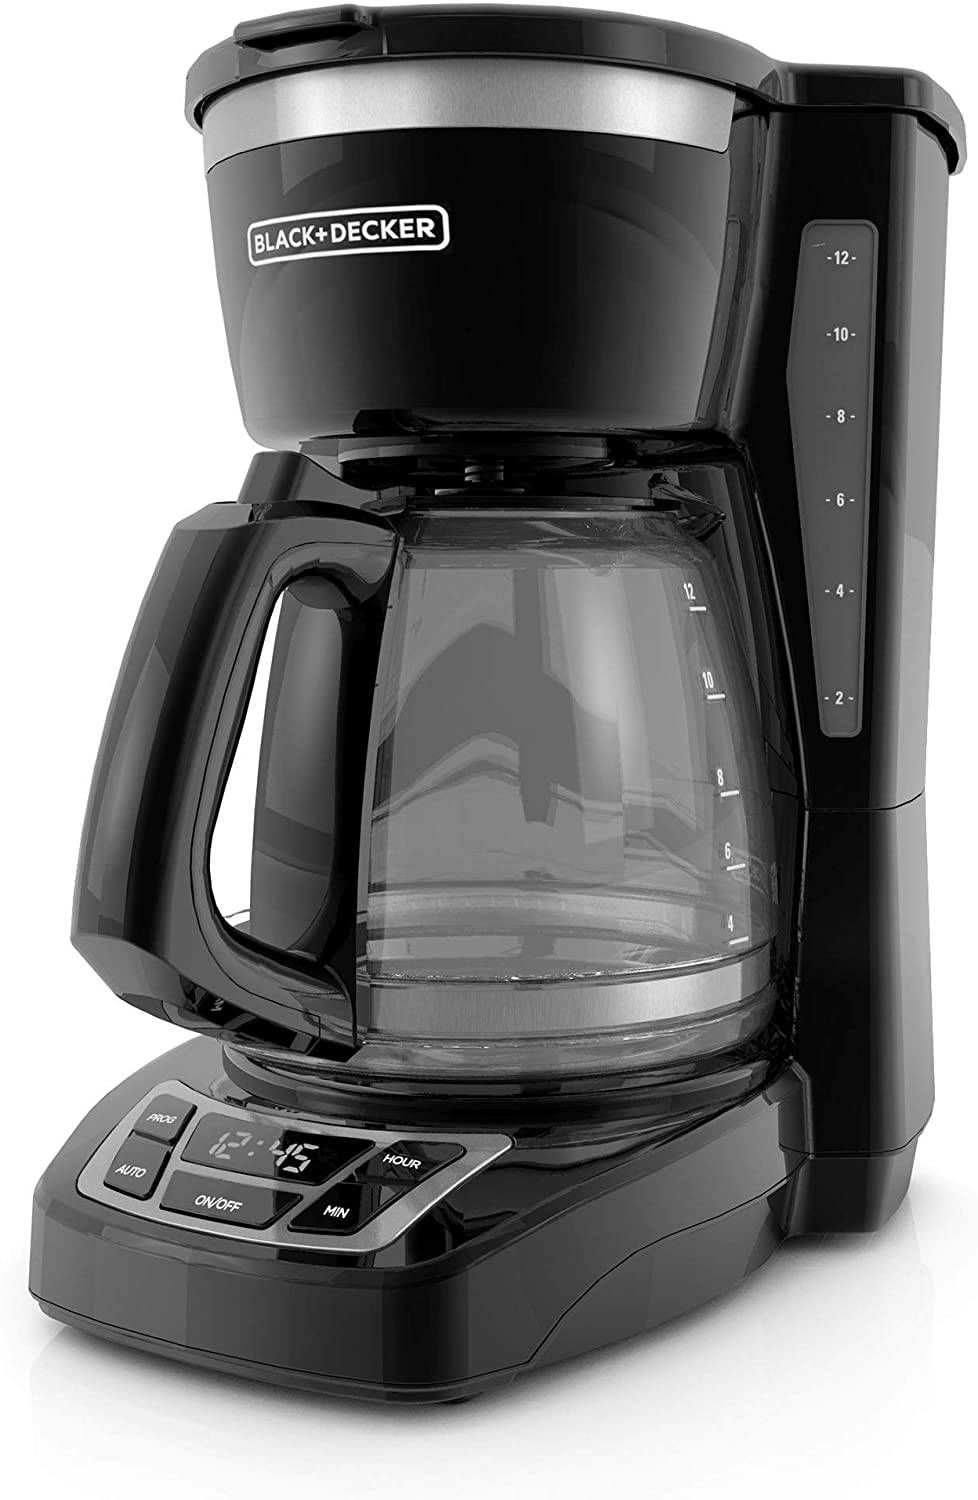 Krups Type 321 (Black) ProCafe 10 Cup Automatic Drip Coffee Maker No Filter